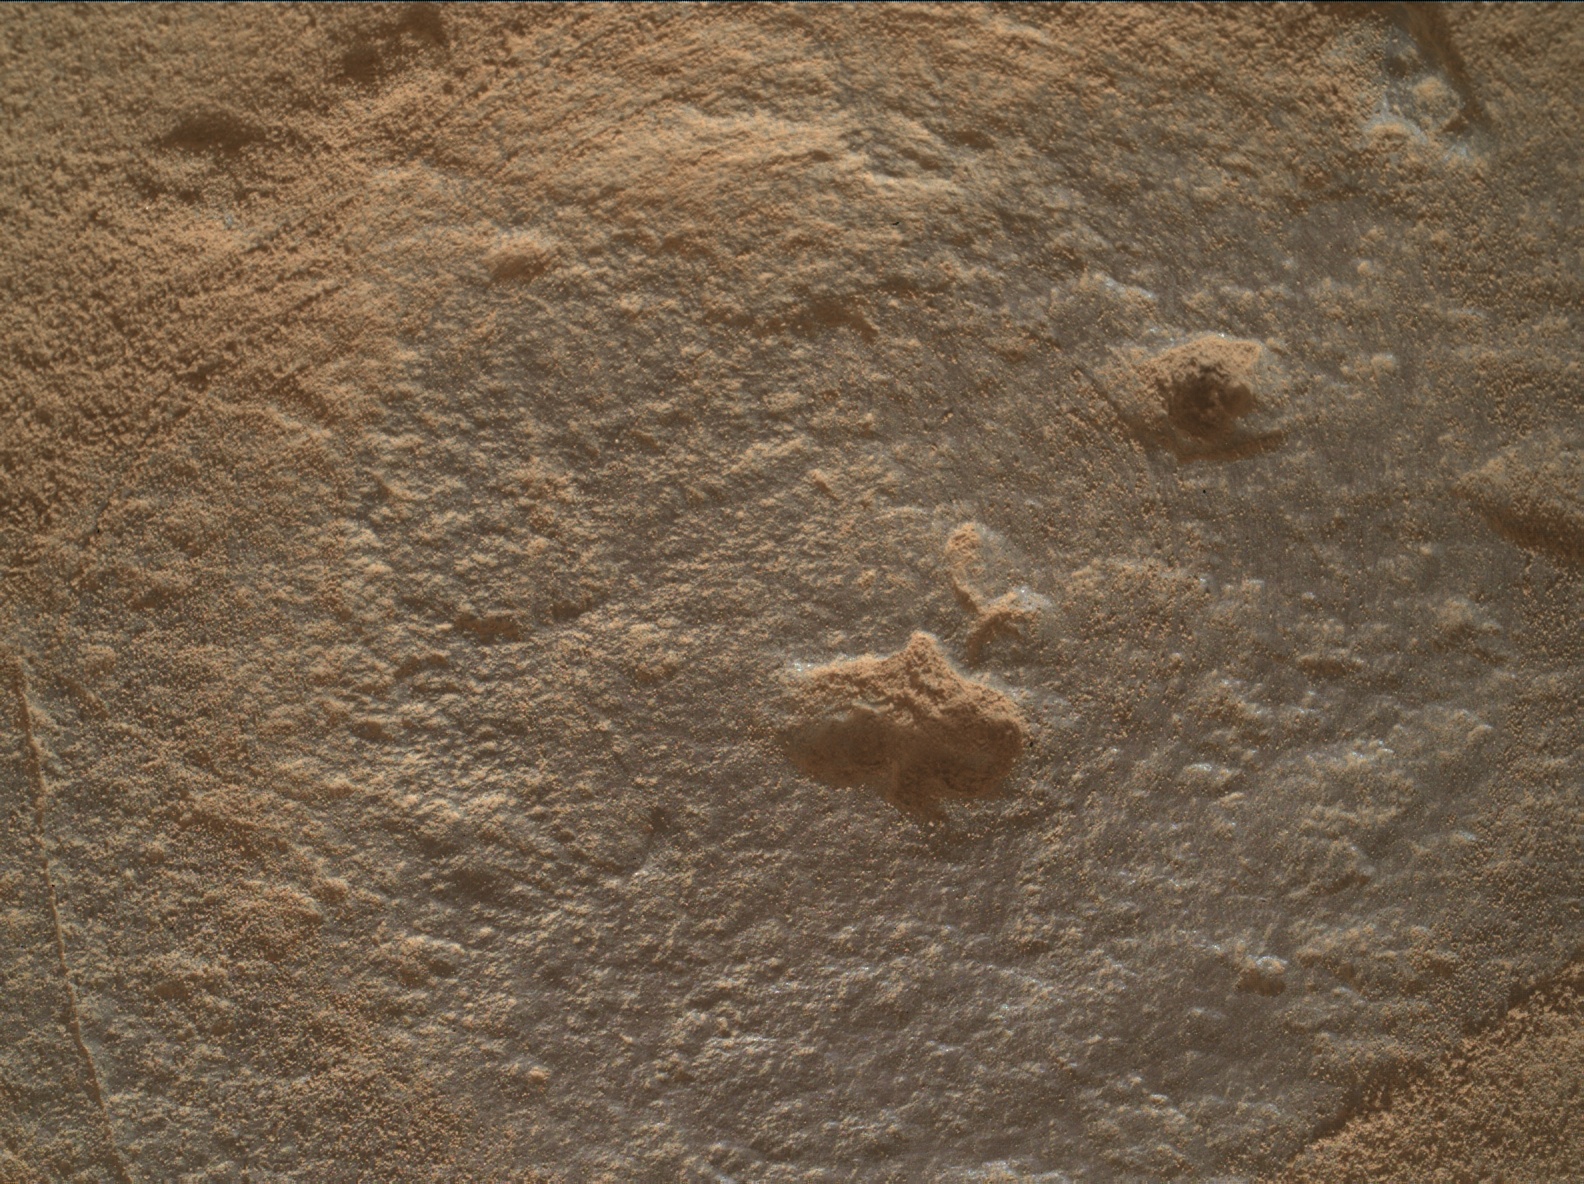 Nasa's Mars rover Curiosity acquired this image using its Mars Hand Lens Imager (MAHLI) on Sol 3716